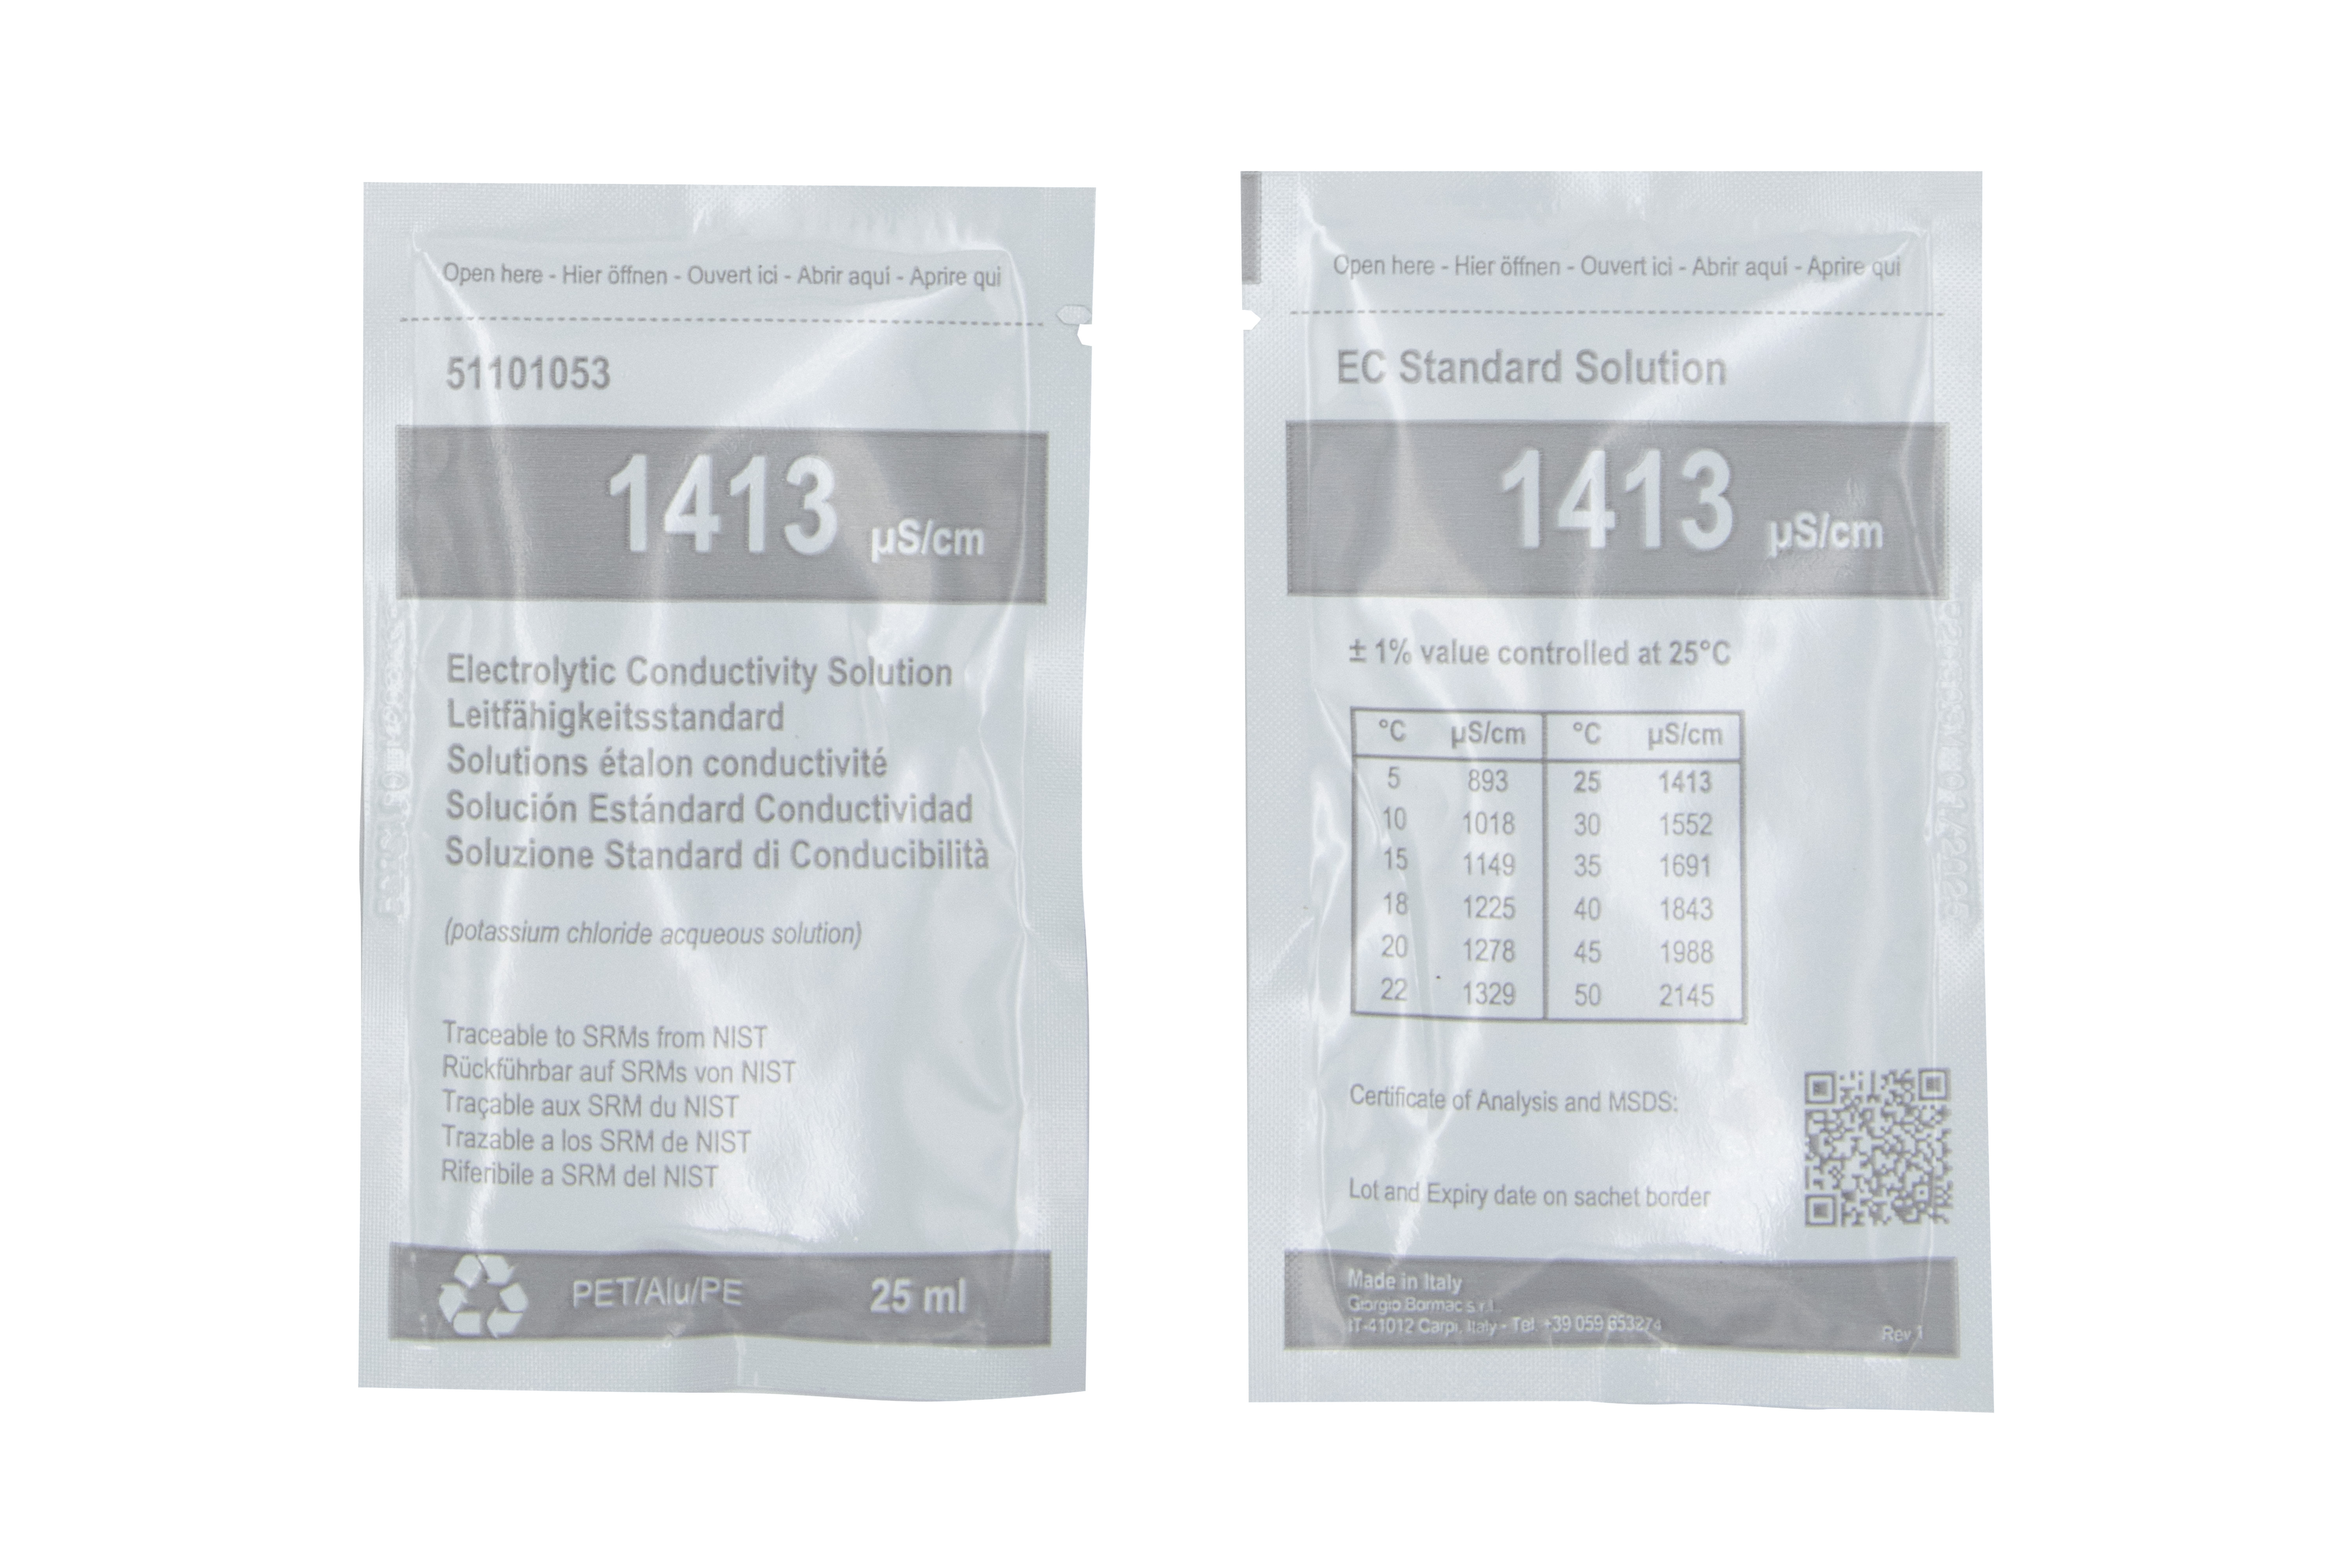 XS BASIC EC 1413 µS/cm (25°C) calibration solution pack with 20 sachets of 25ml with certificate of analysis